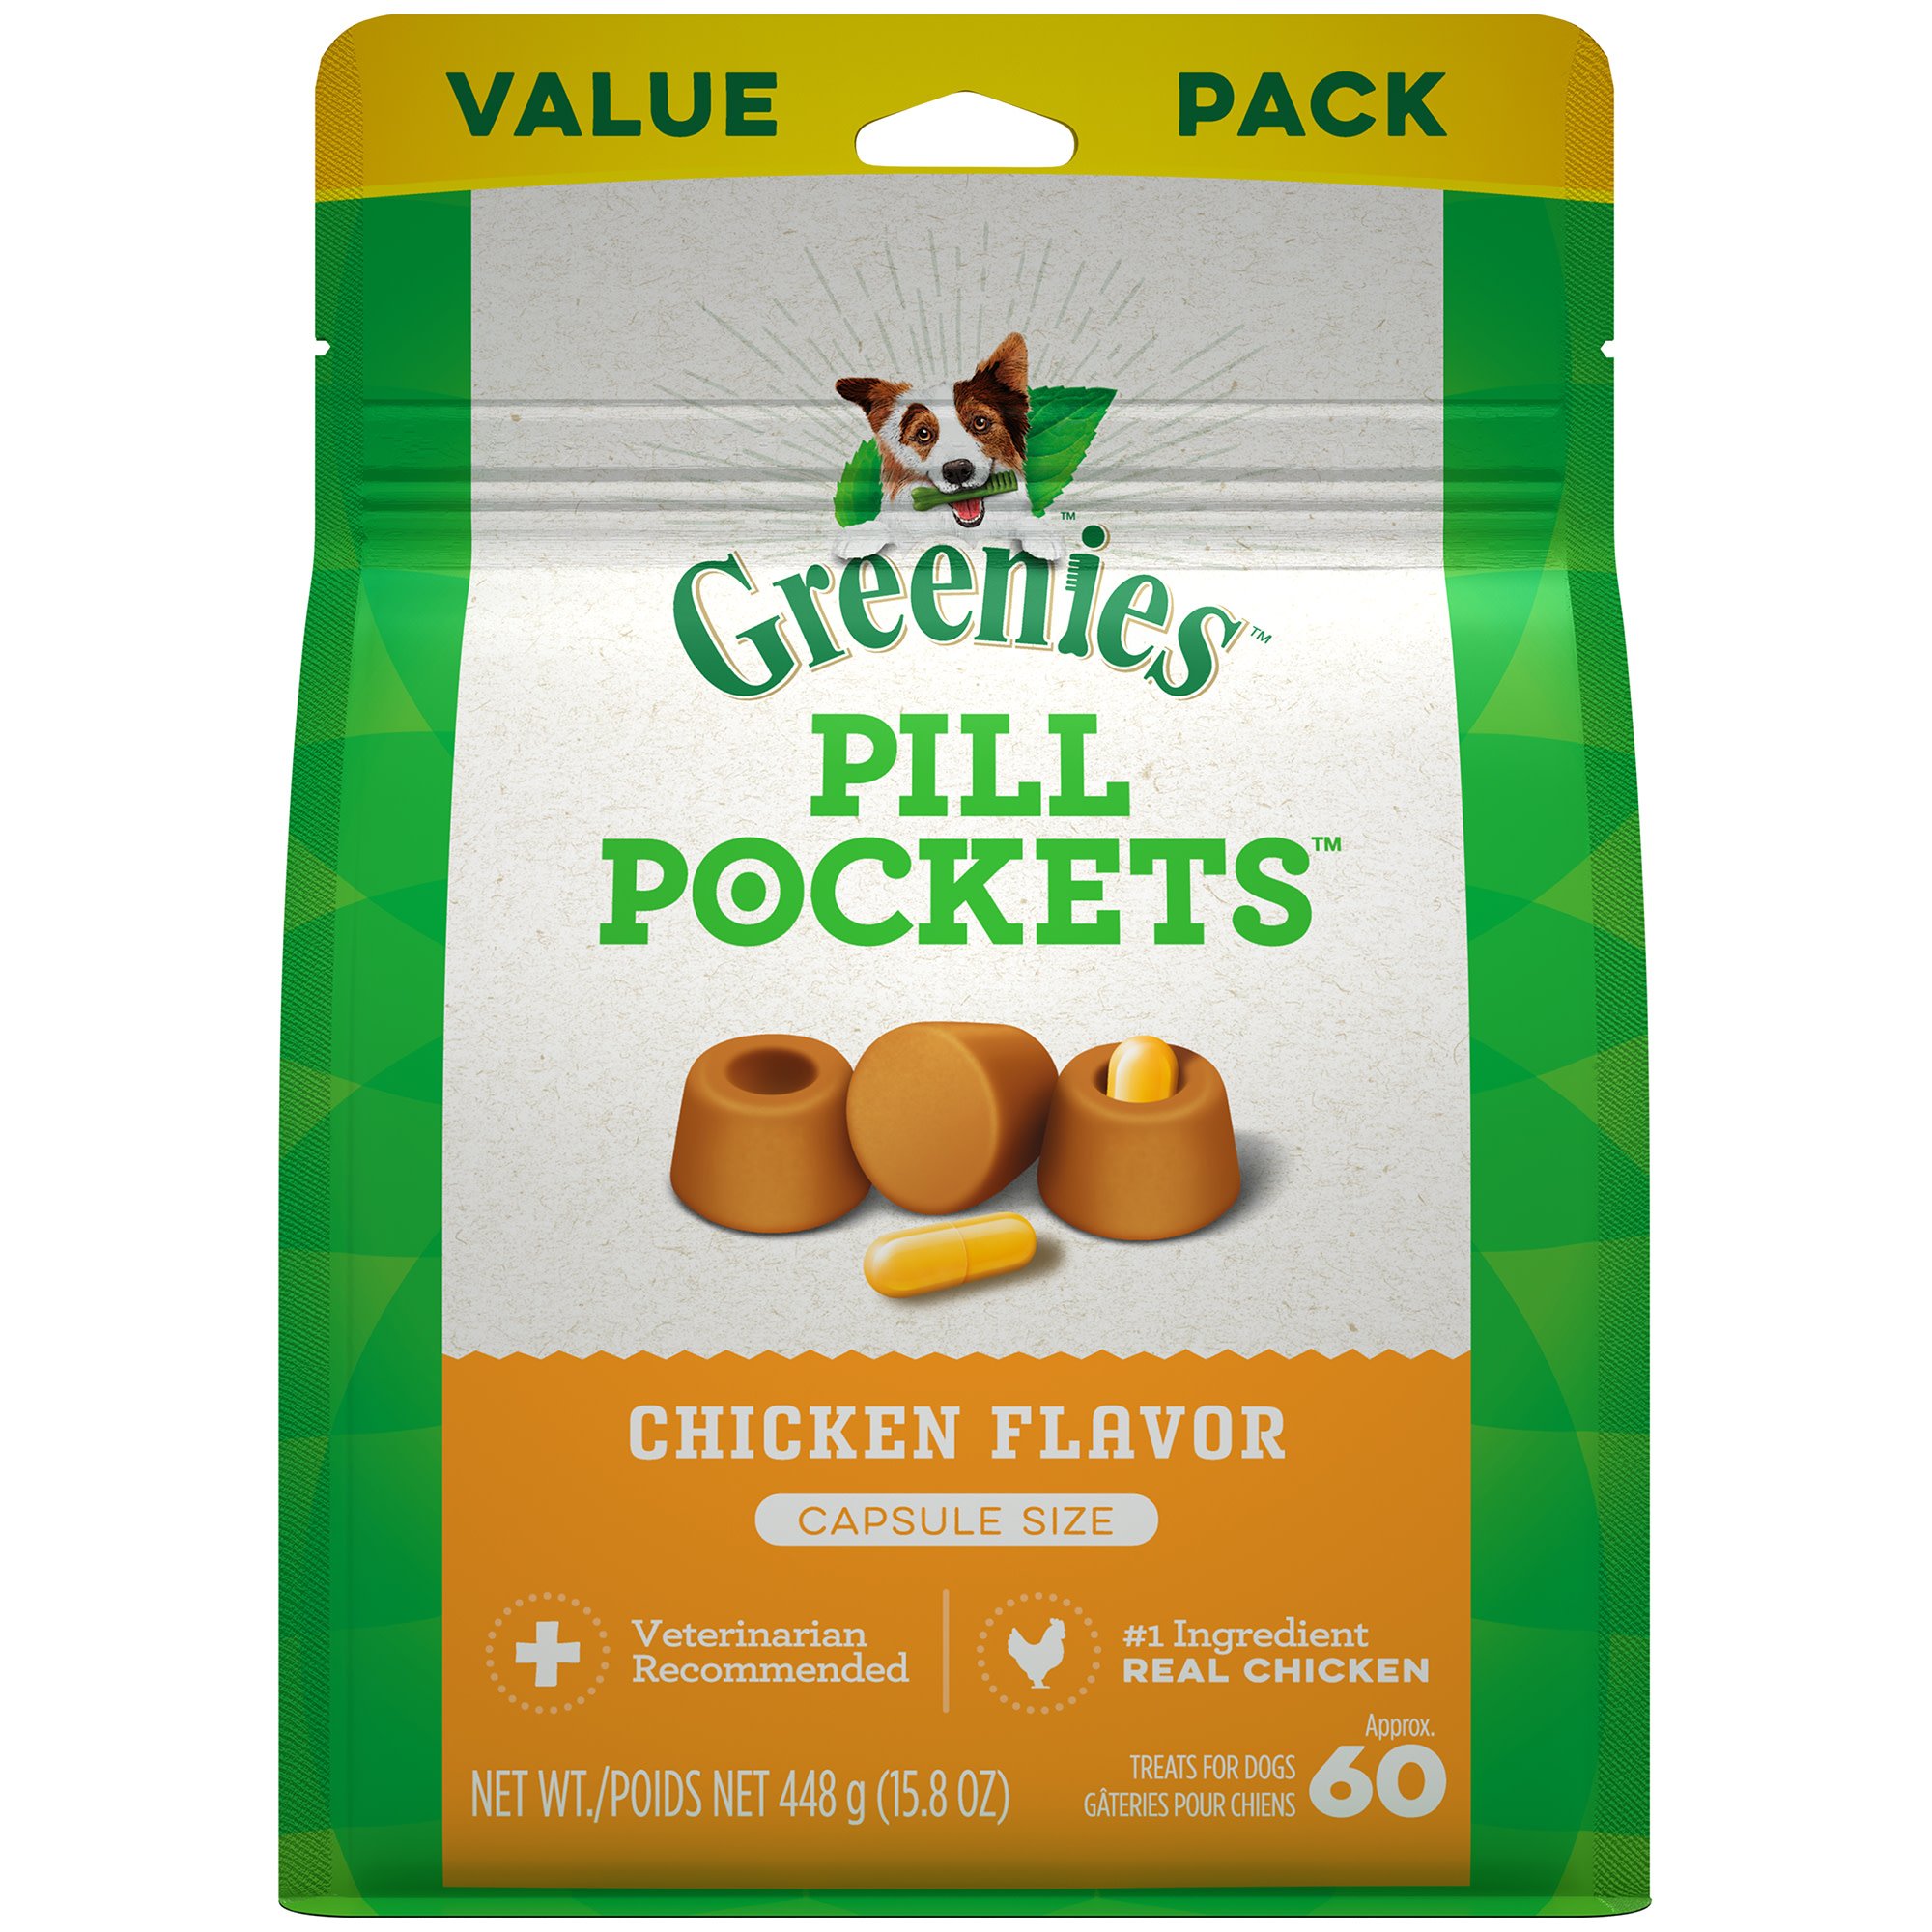 Greenies Pill Pockets Chicken Flavor Treats For Dogs, Capsule Size Petco